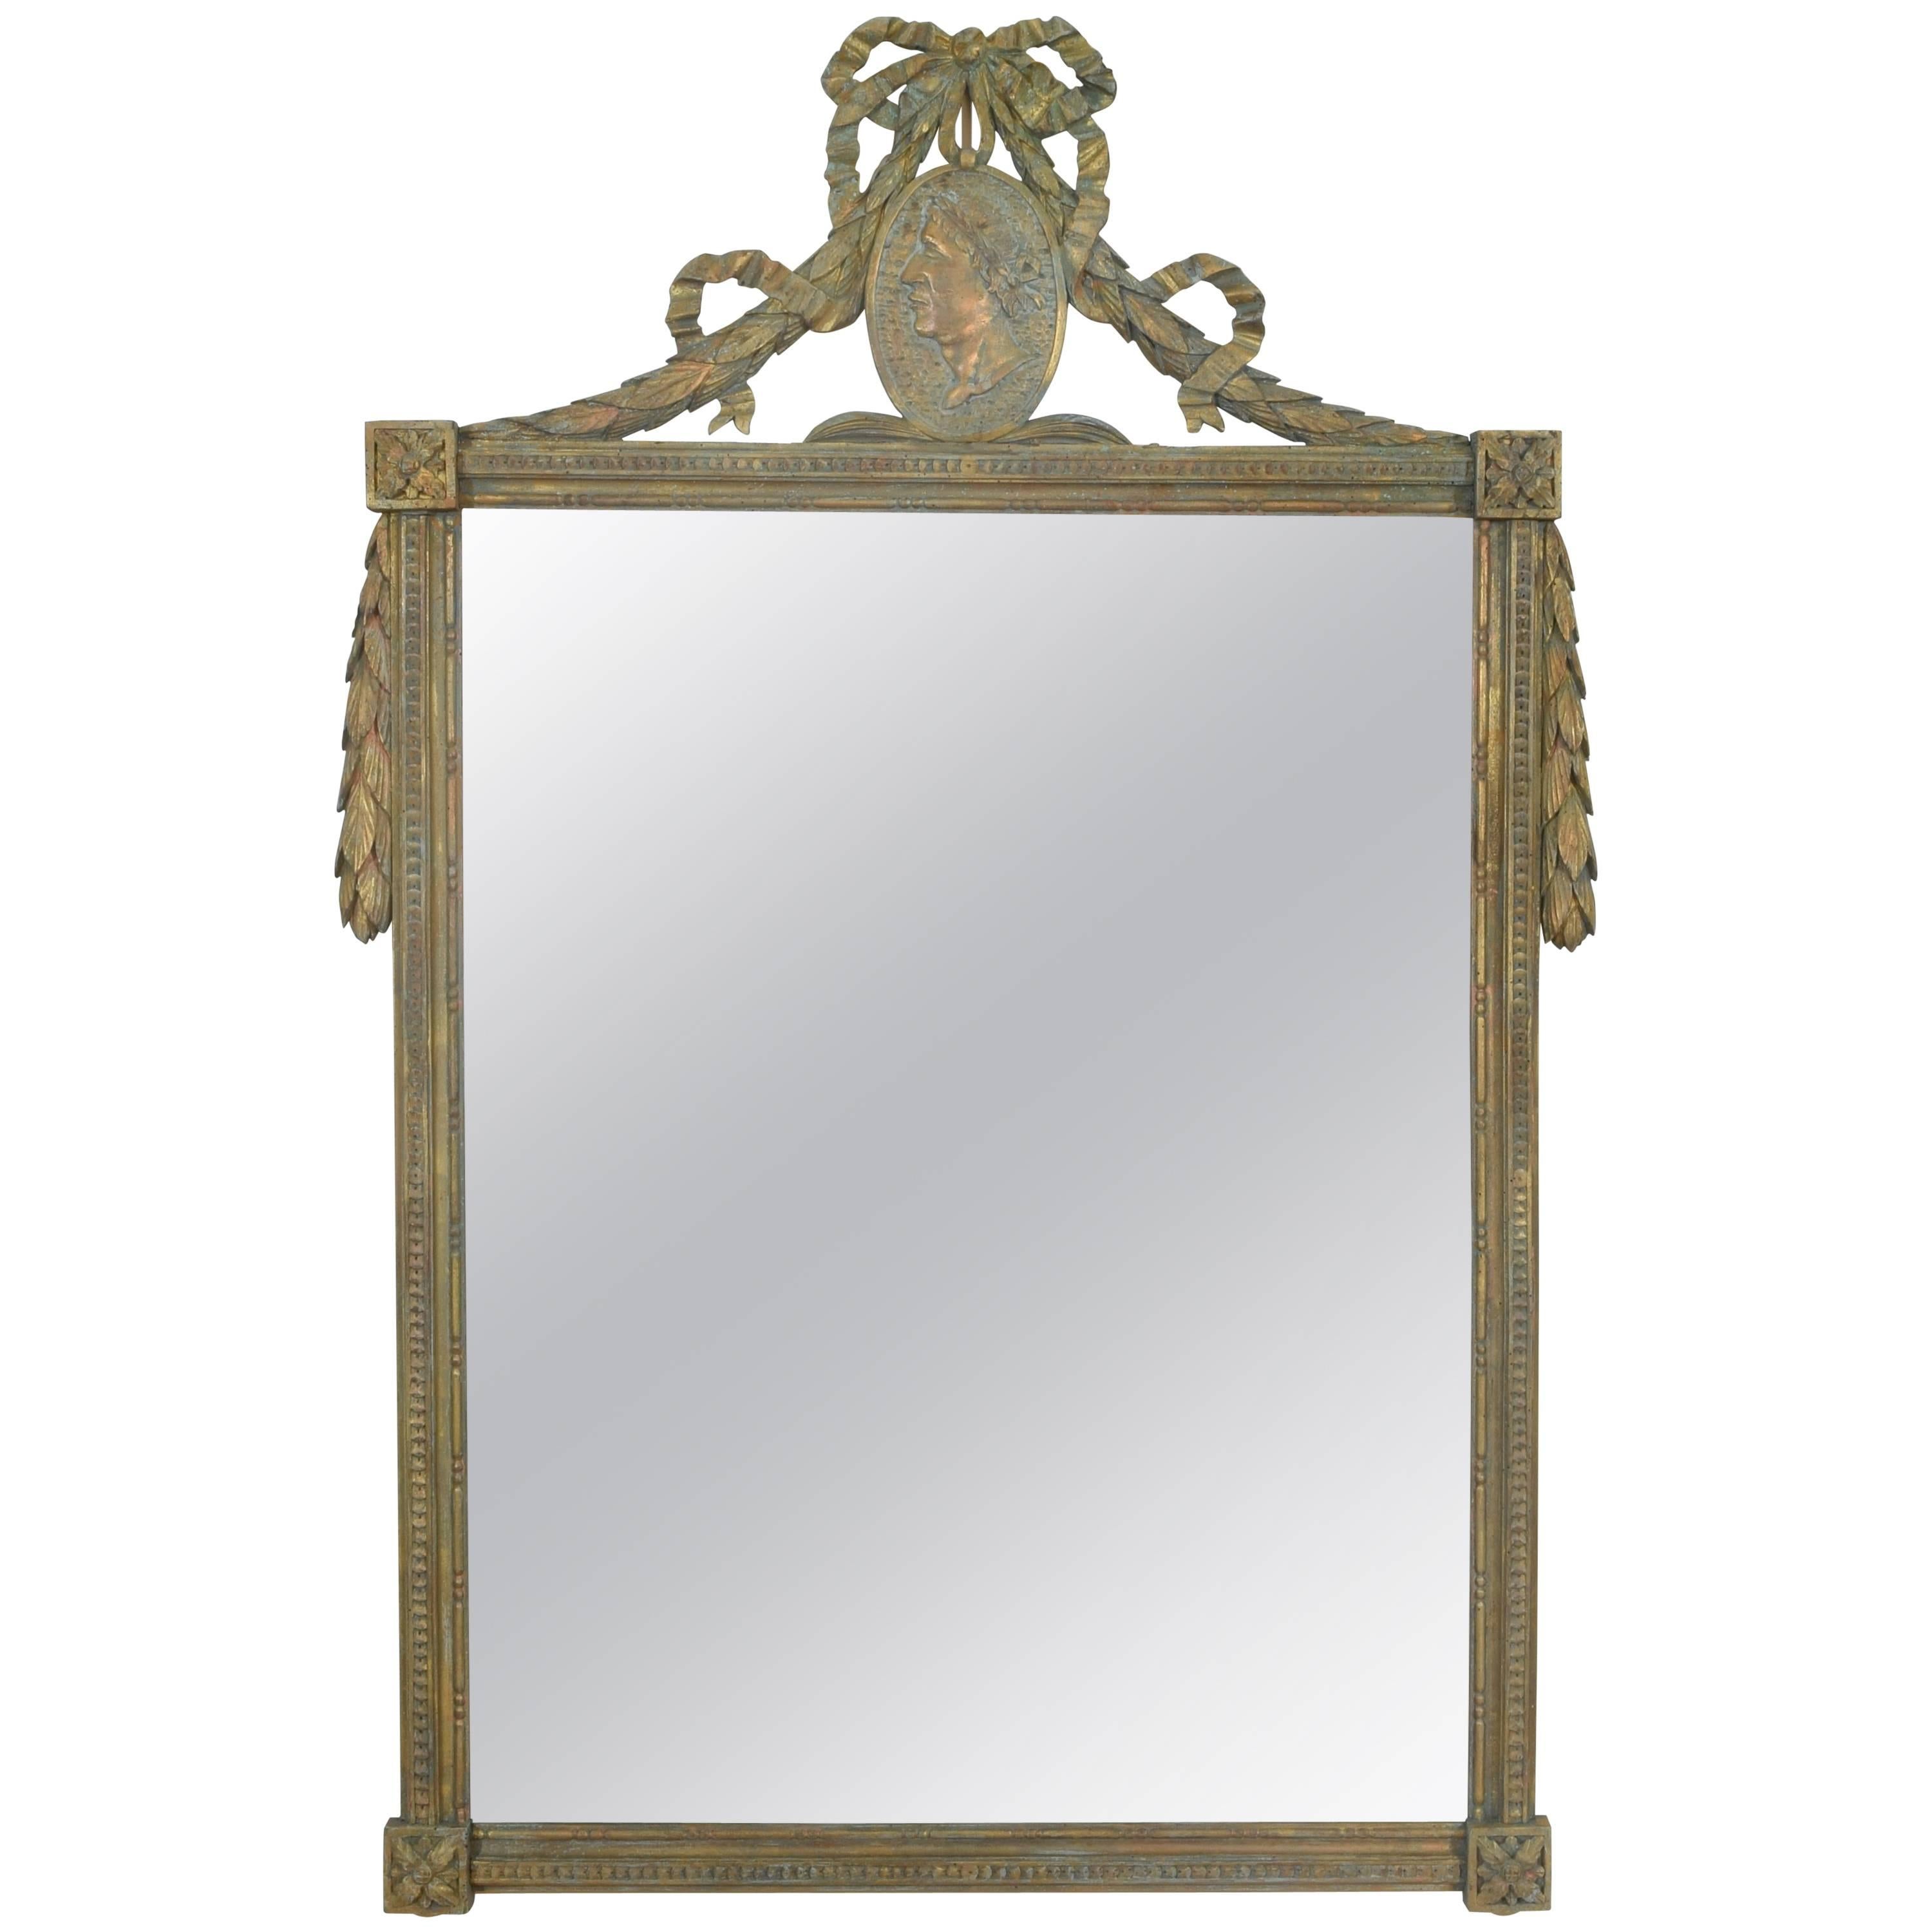 Italian Neoclassic Carved Giltwood Mirror with Verdigris Accents, 19th Century